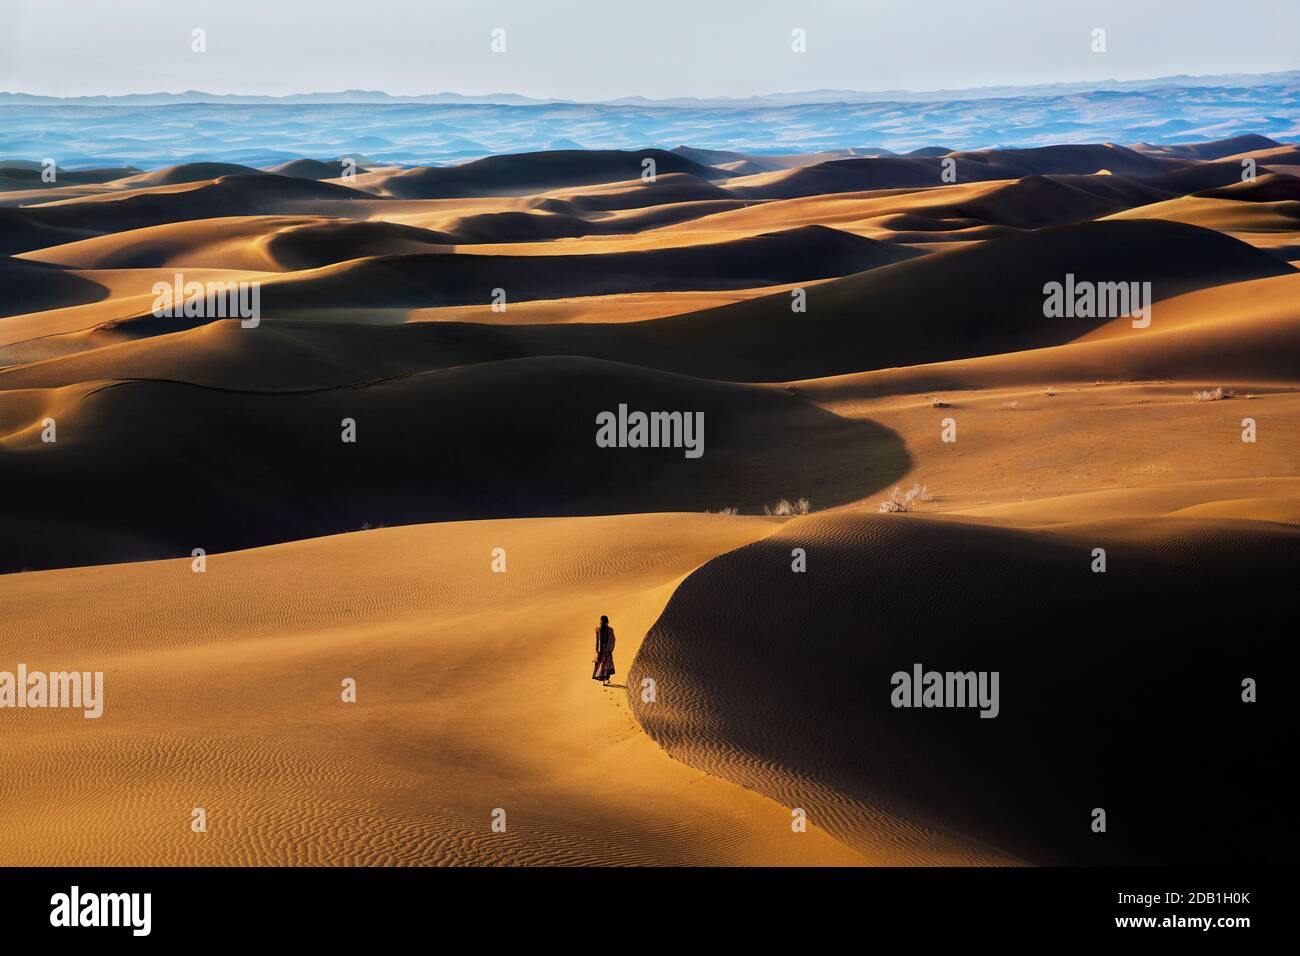 Maranjab Desert is a famous part of Iran central Desert and is located in the northern city of Aran and Bidgol in Isfahan province of Iran. Stock Photo